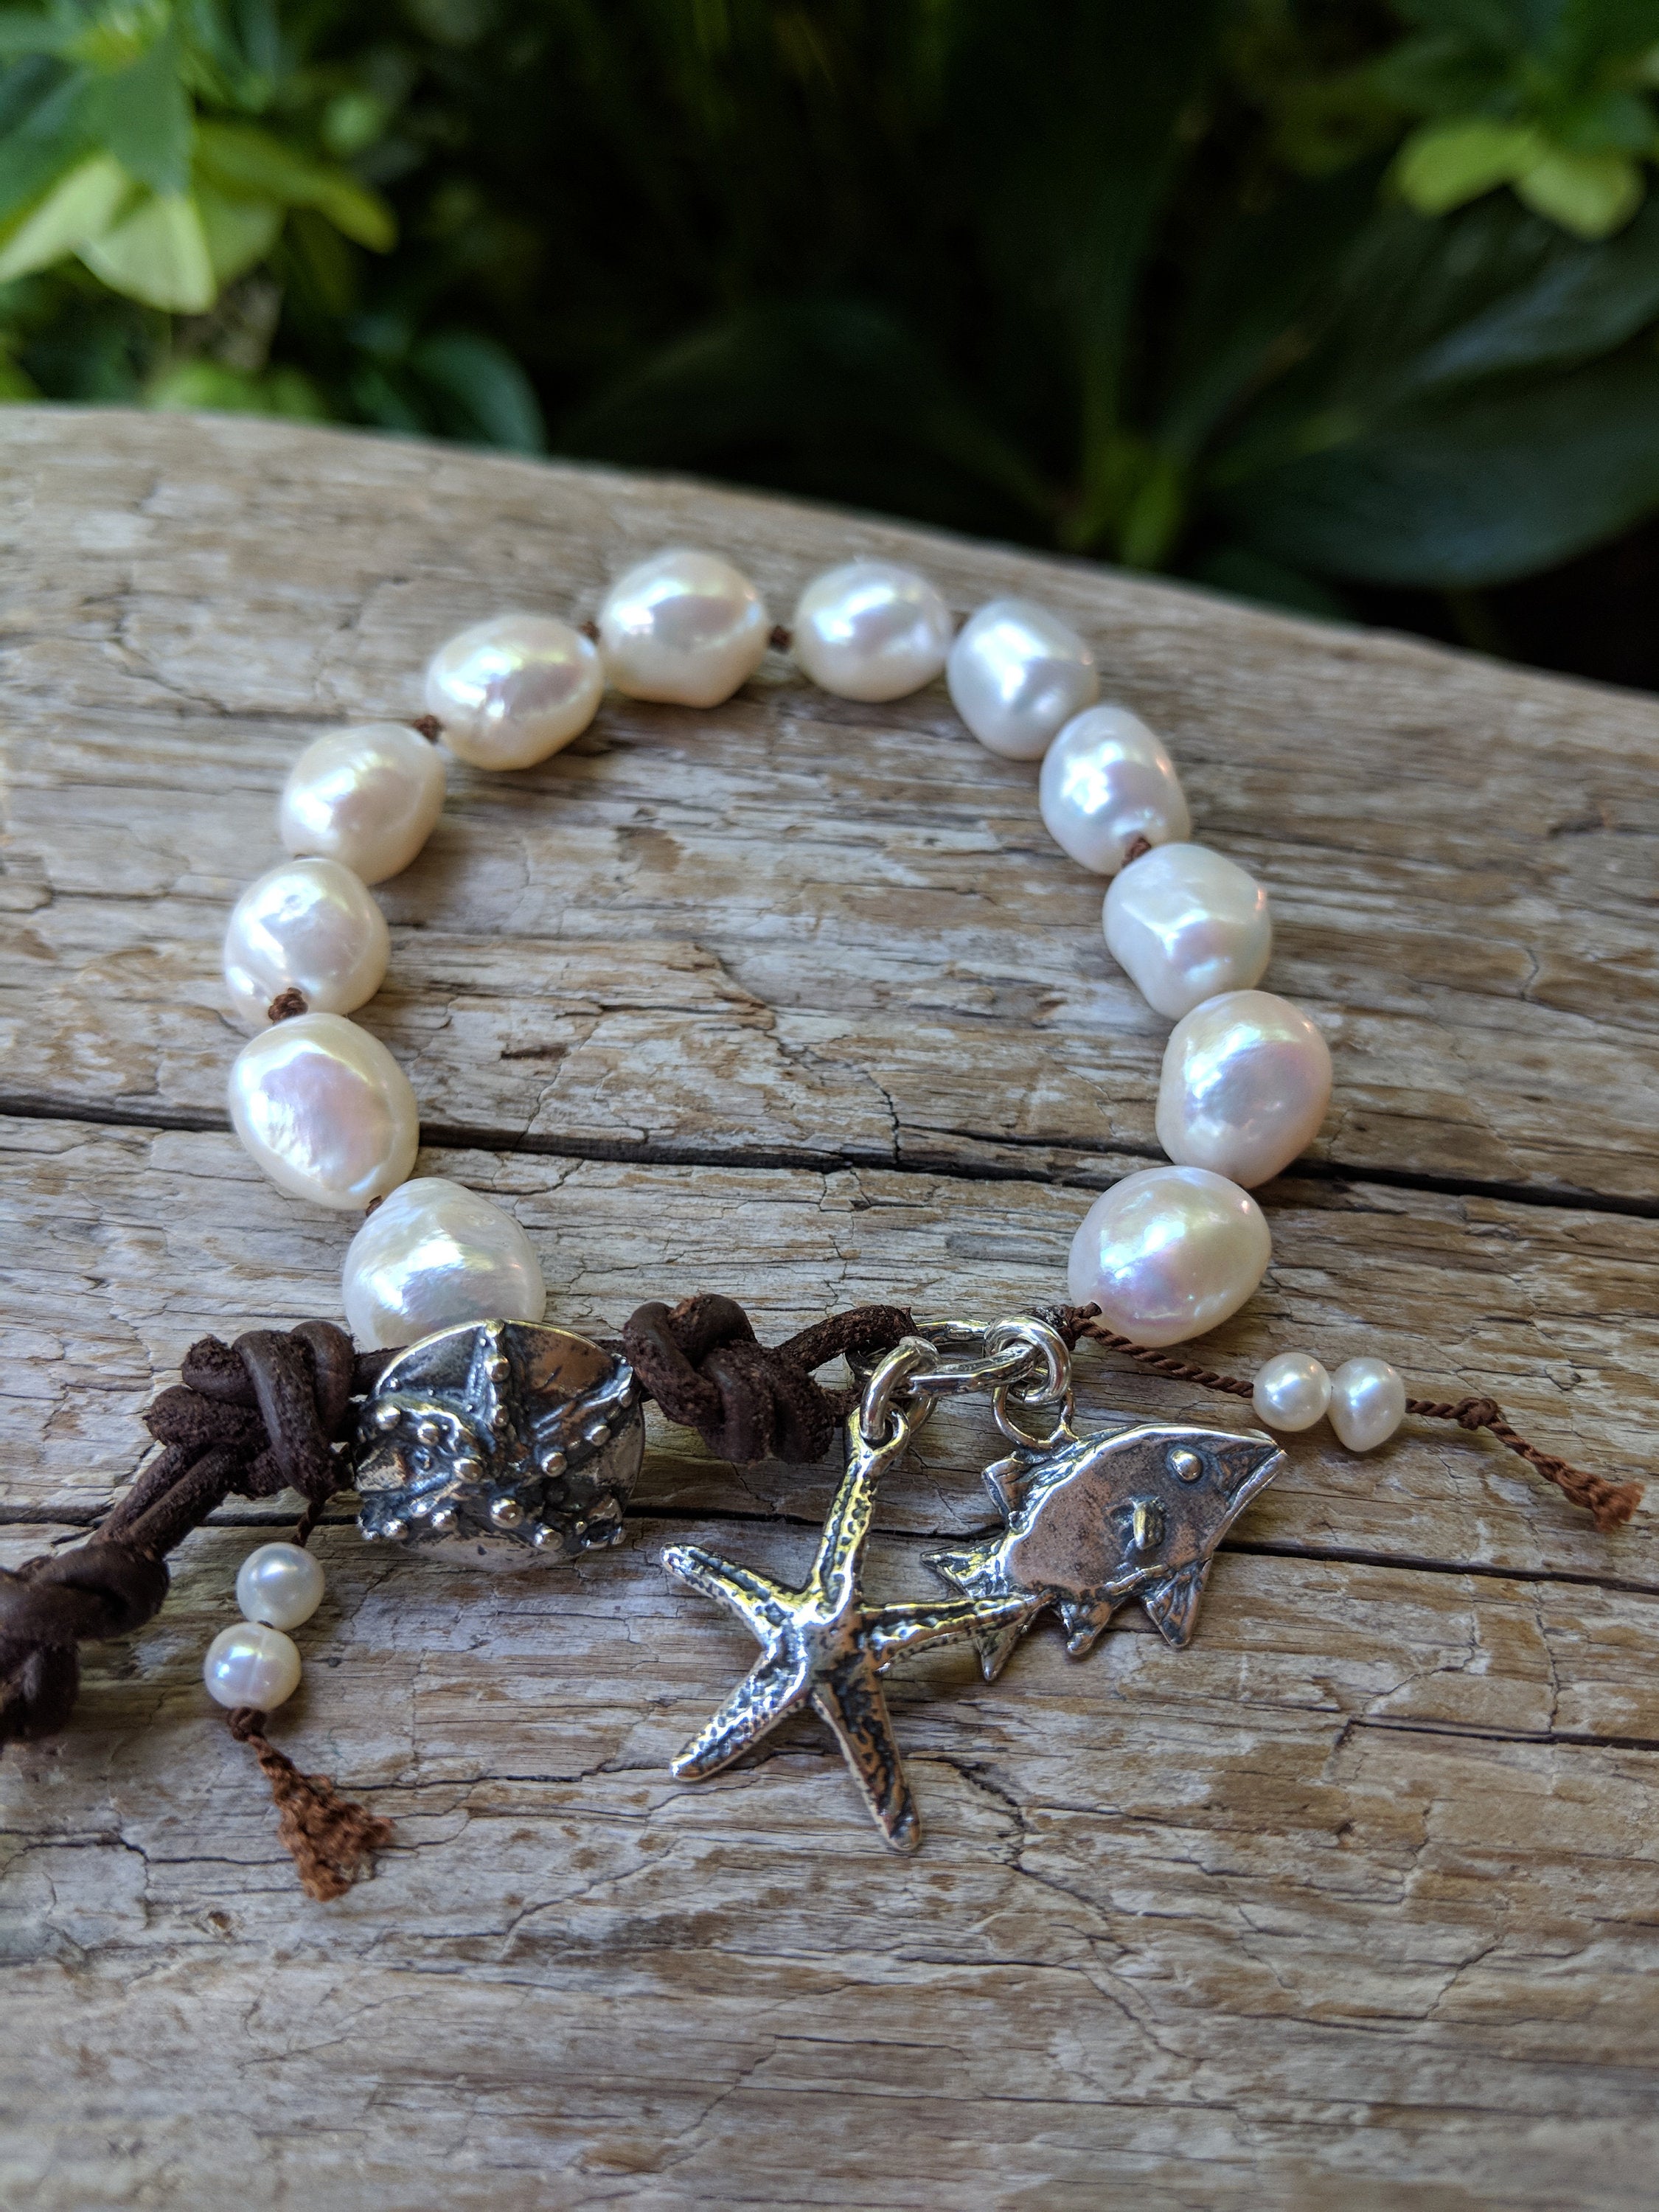 Handmade Boho Natural Baroque Pearl Leather Bracelet with Fish and Starfish Charms - a fun and chic bracelet showcasing the beauty of large white baroque pearls complemented by artisan sterling silver charms and rustic leather